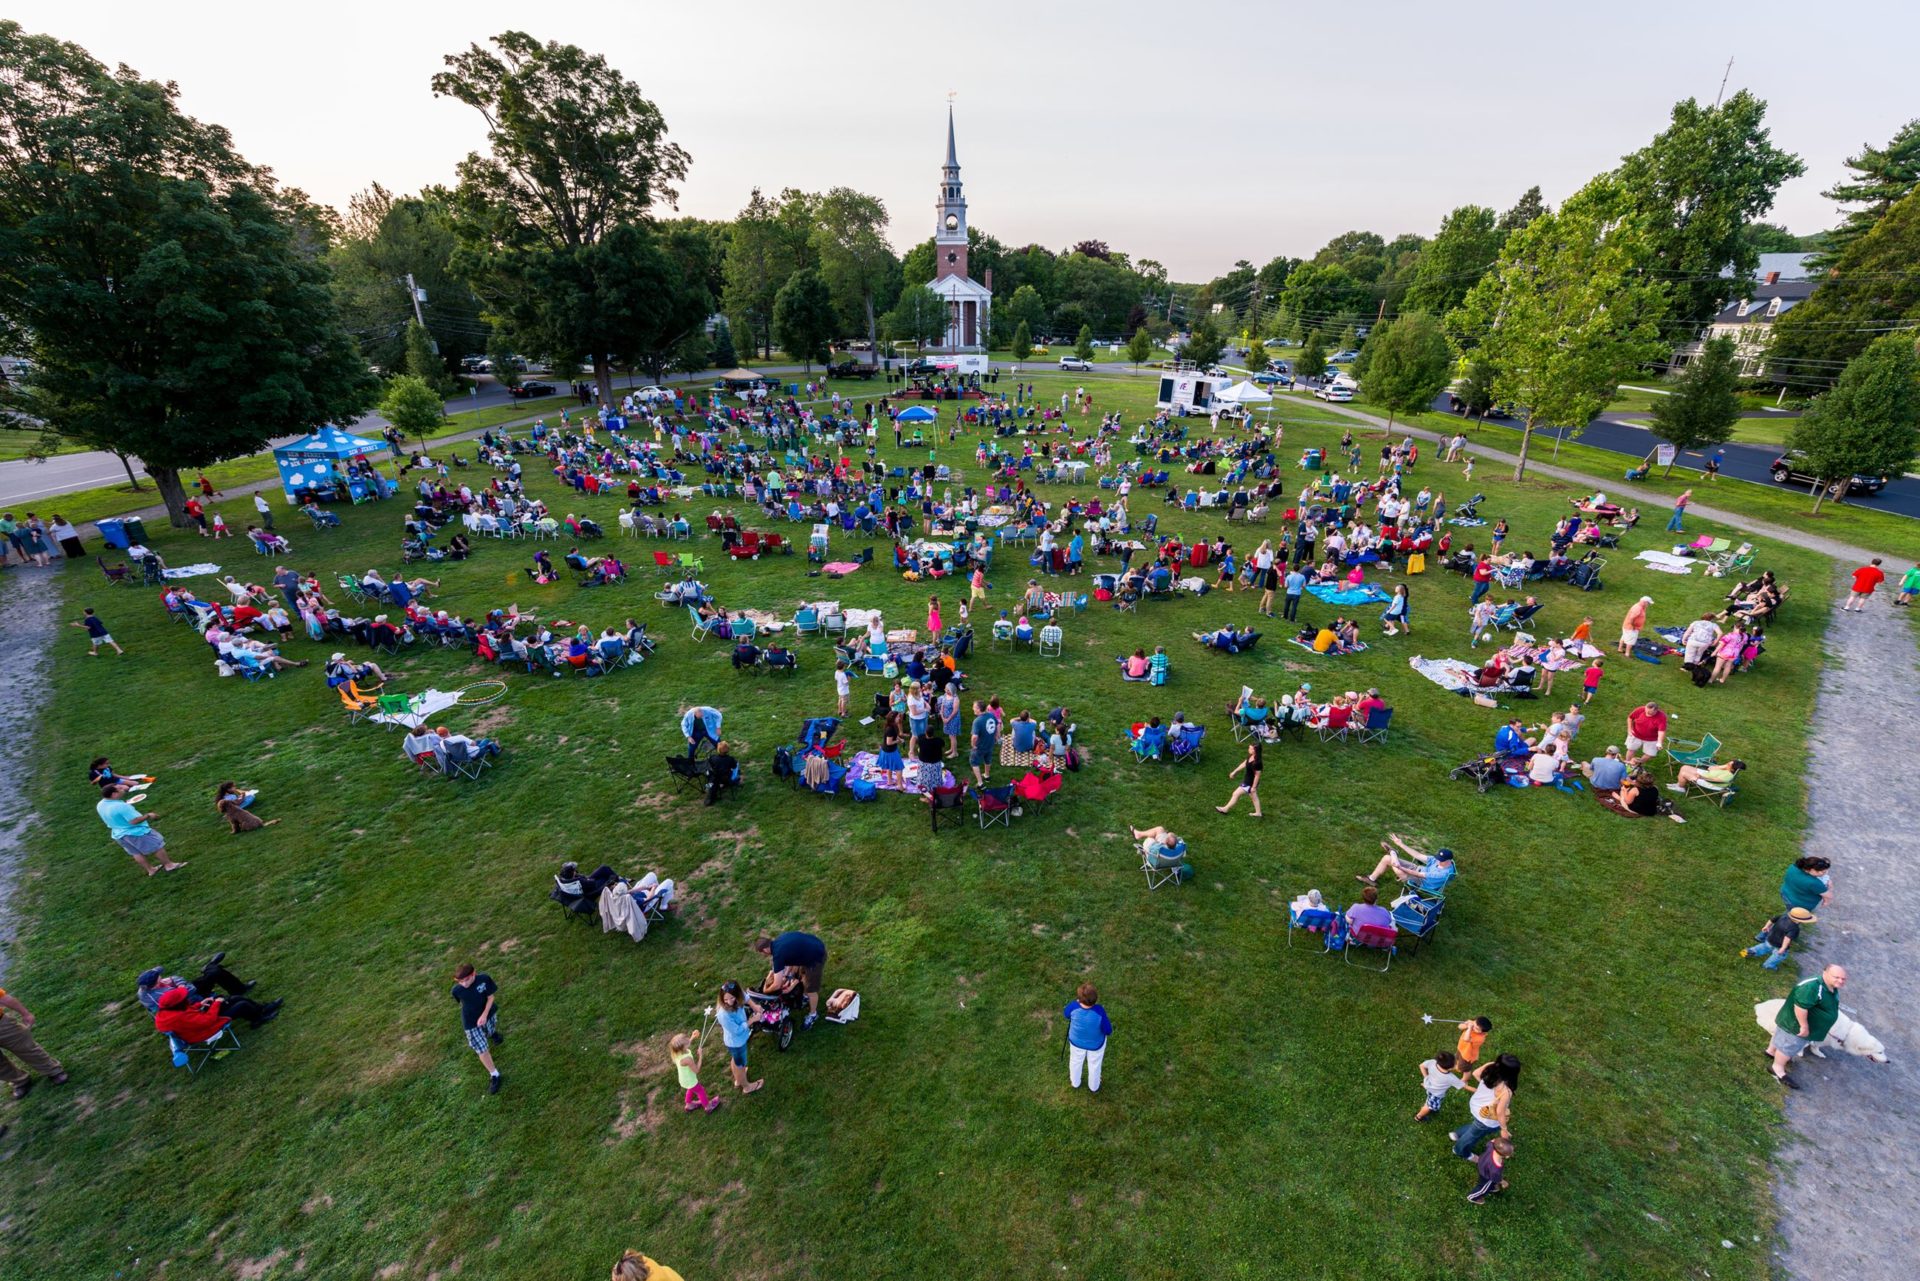 Concerts on the Green - June-August - Fridays @ 6:30 on the Framingham Centre Common/Village Green (off Edgell Road - just north of Route 9)